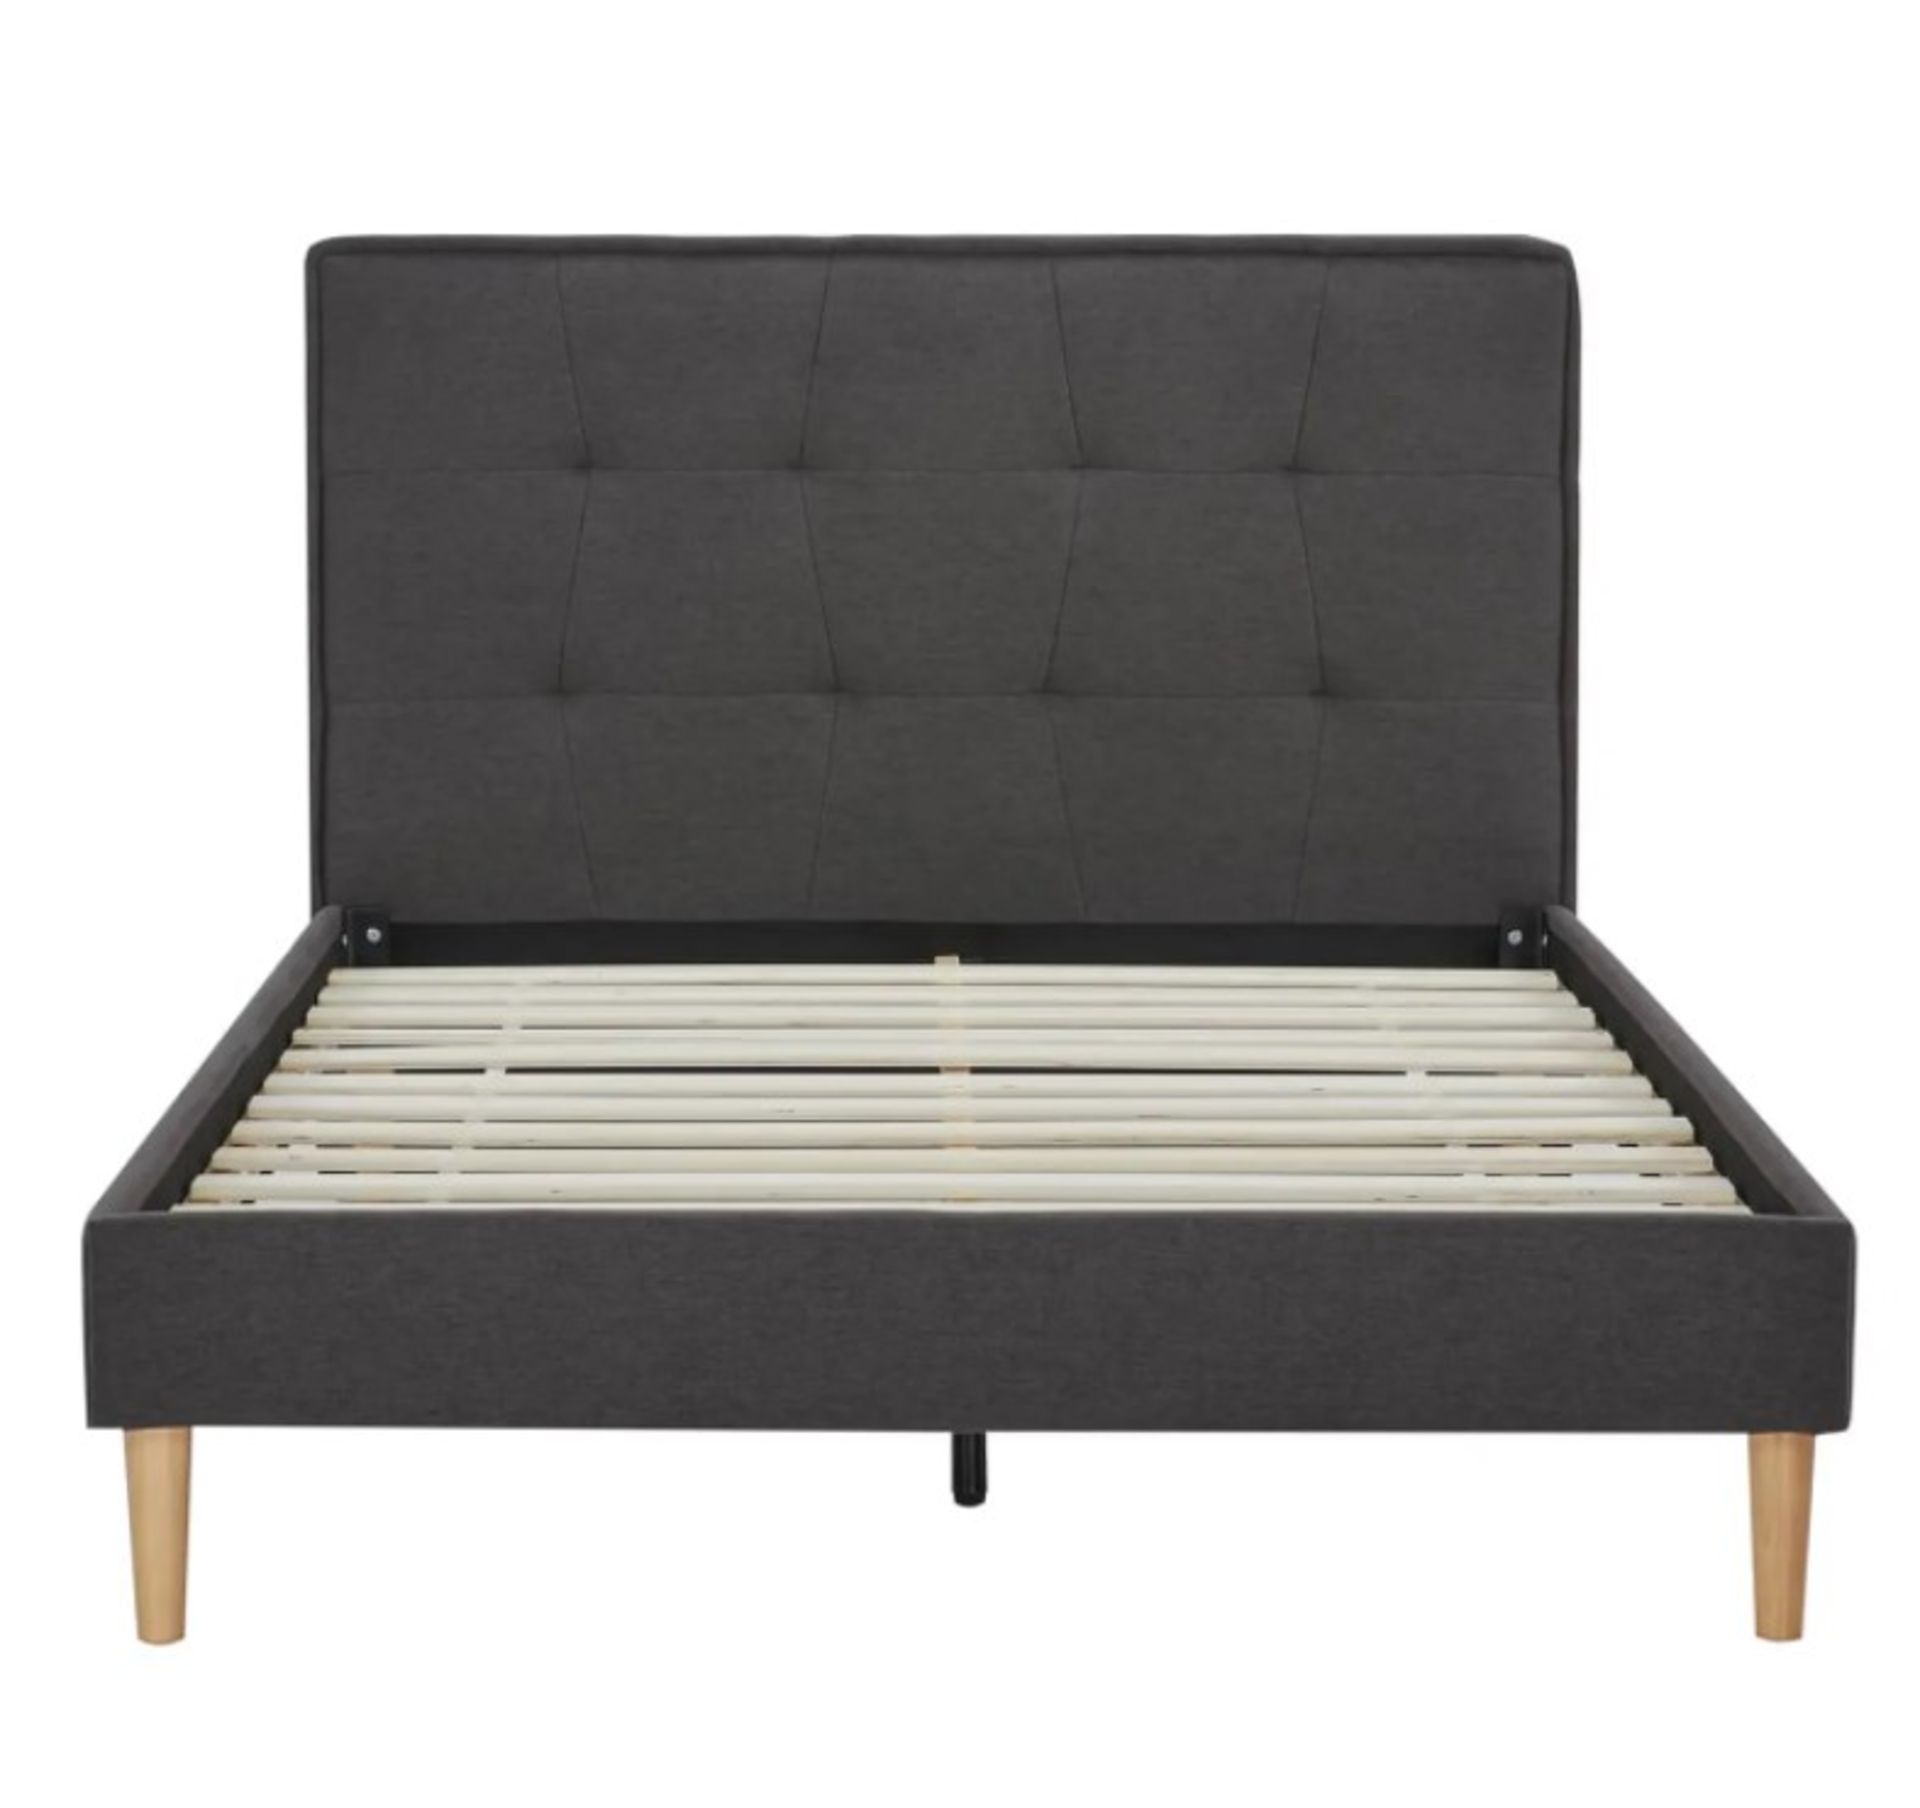 (16) 1x Metro Double Bed Frame Grey RRP £200. (H110x W143x L208cm). This Lot Contains 3x Units – Bo - Image 3 of 5